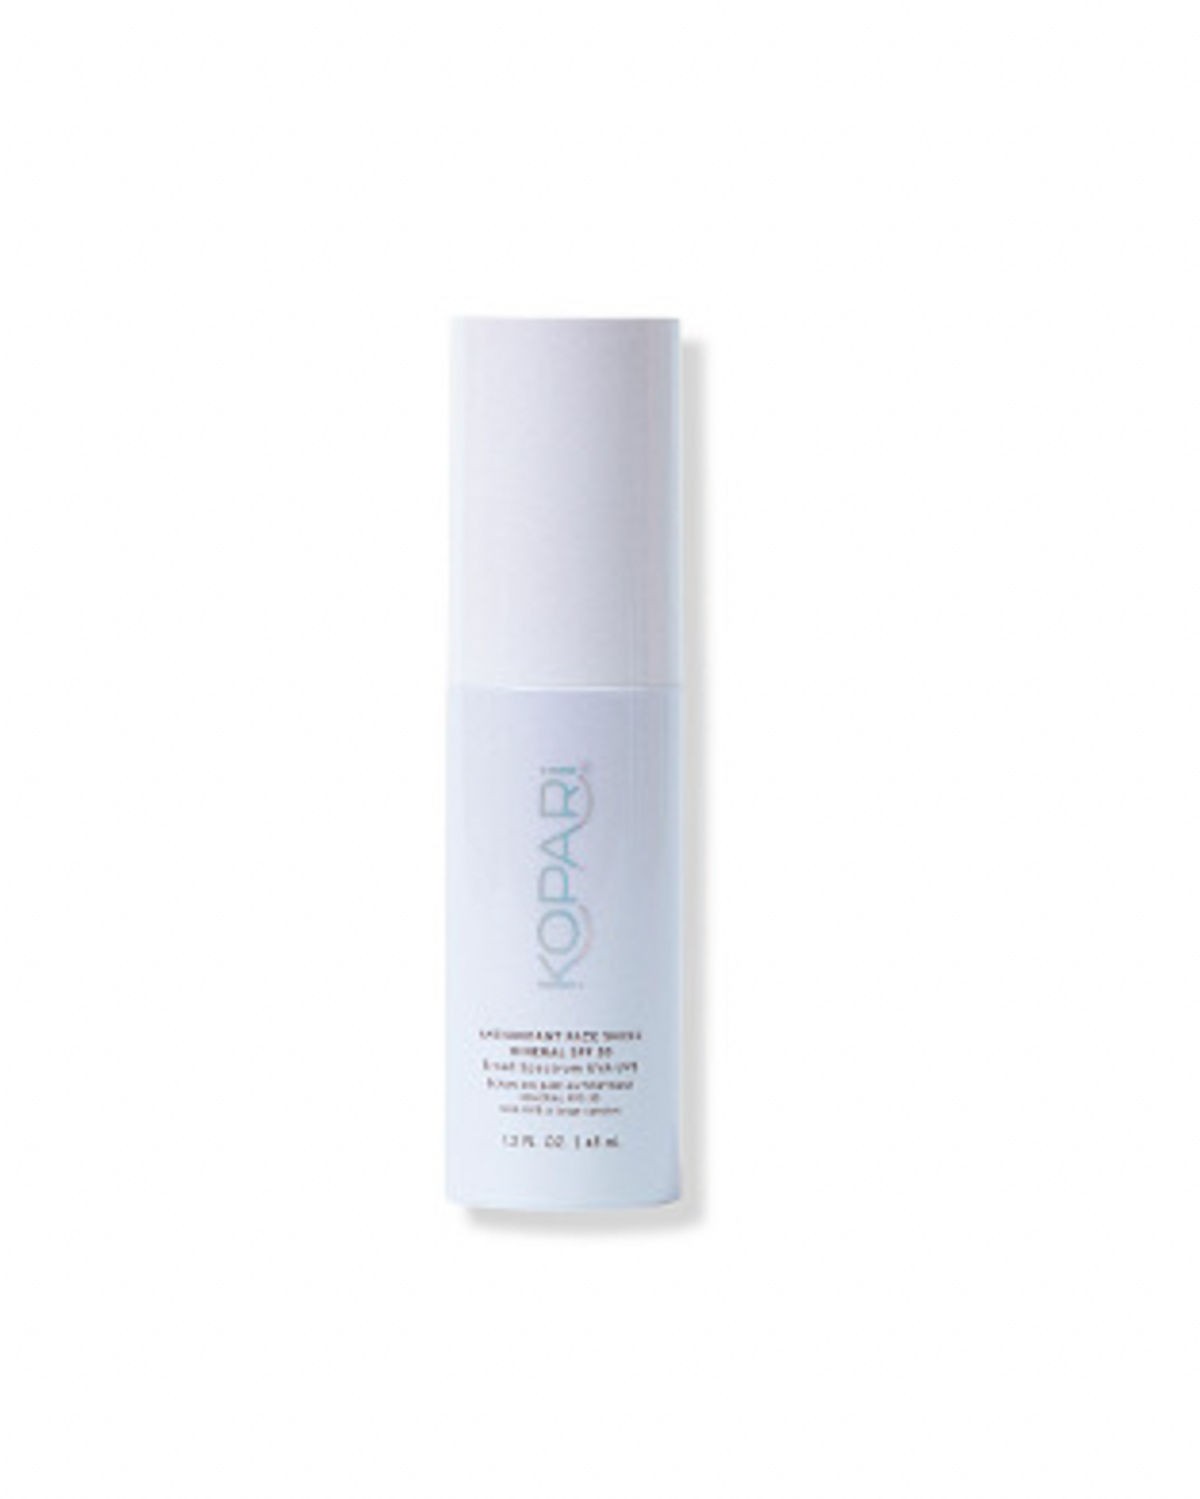 Antioxidant Face Shield Daily 100% Mineral Spf 30